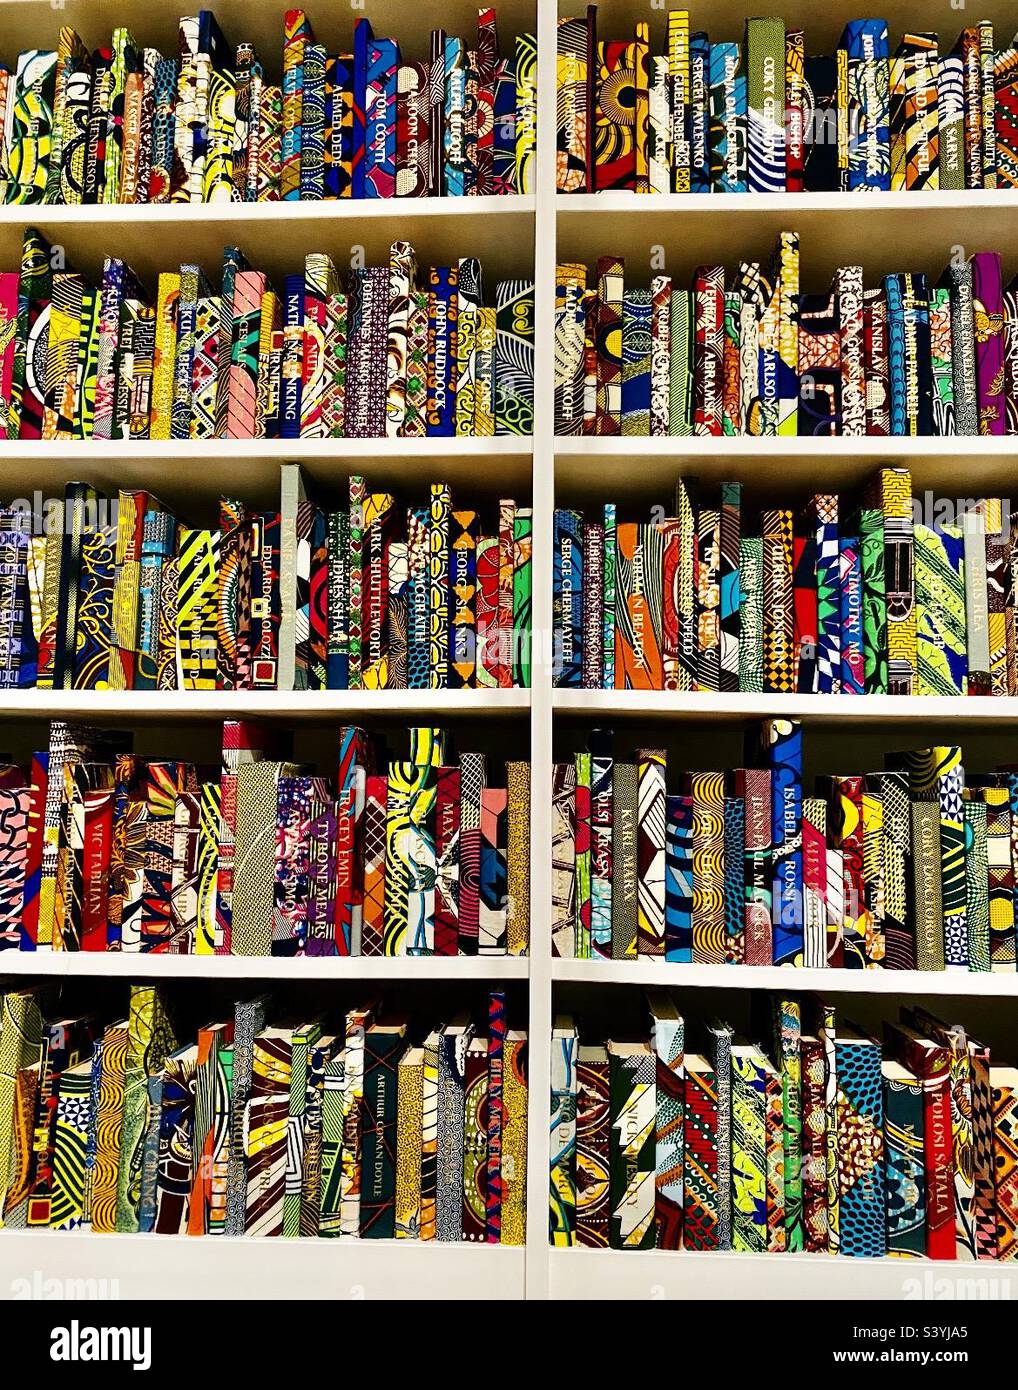 Tate Modern “The British Library 2014” by Yinka Shonibare. A display of 6,328 hardback books individually covered in colourful ‘Dutch wax print’ fabric with gold leaf on the spines of 2,700. Stock Photo